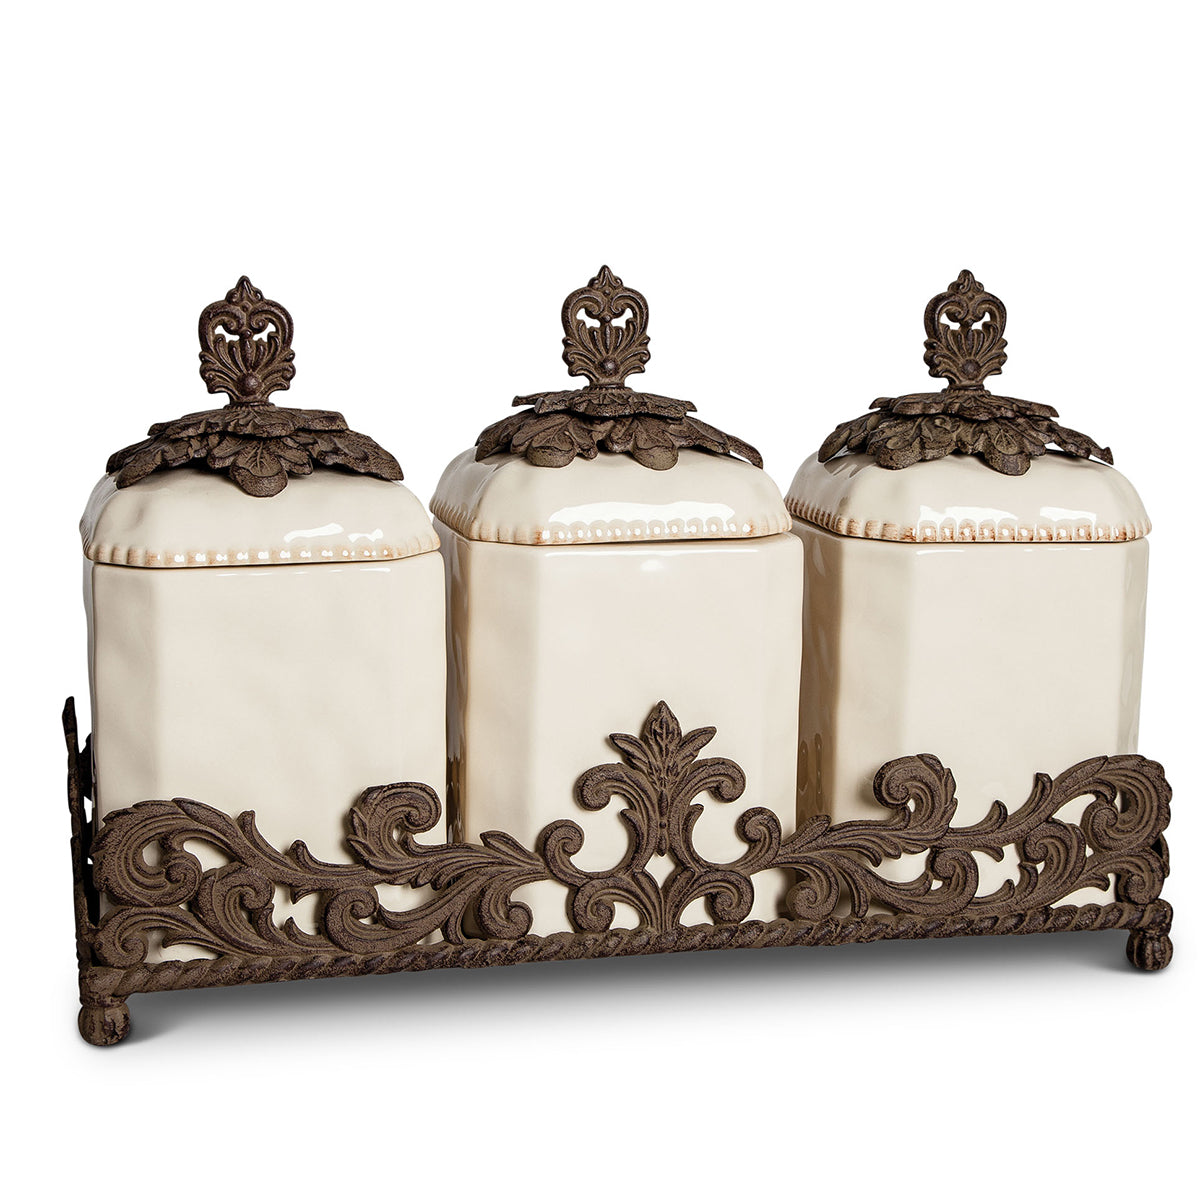 Kitchen Canisters - Iron Accents